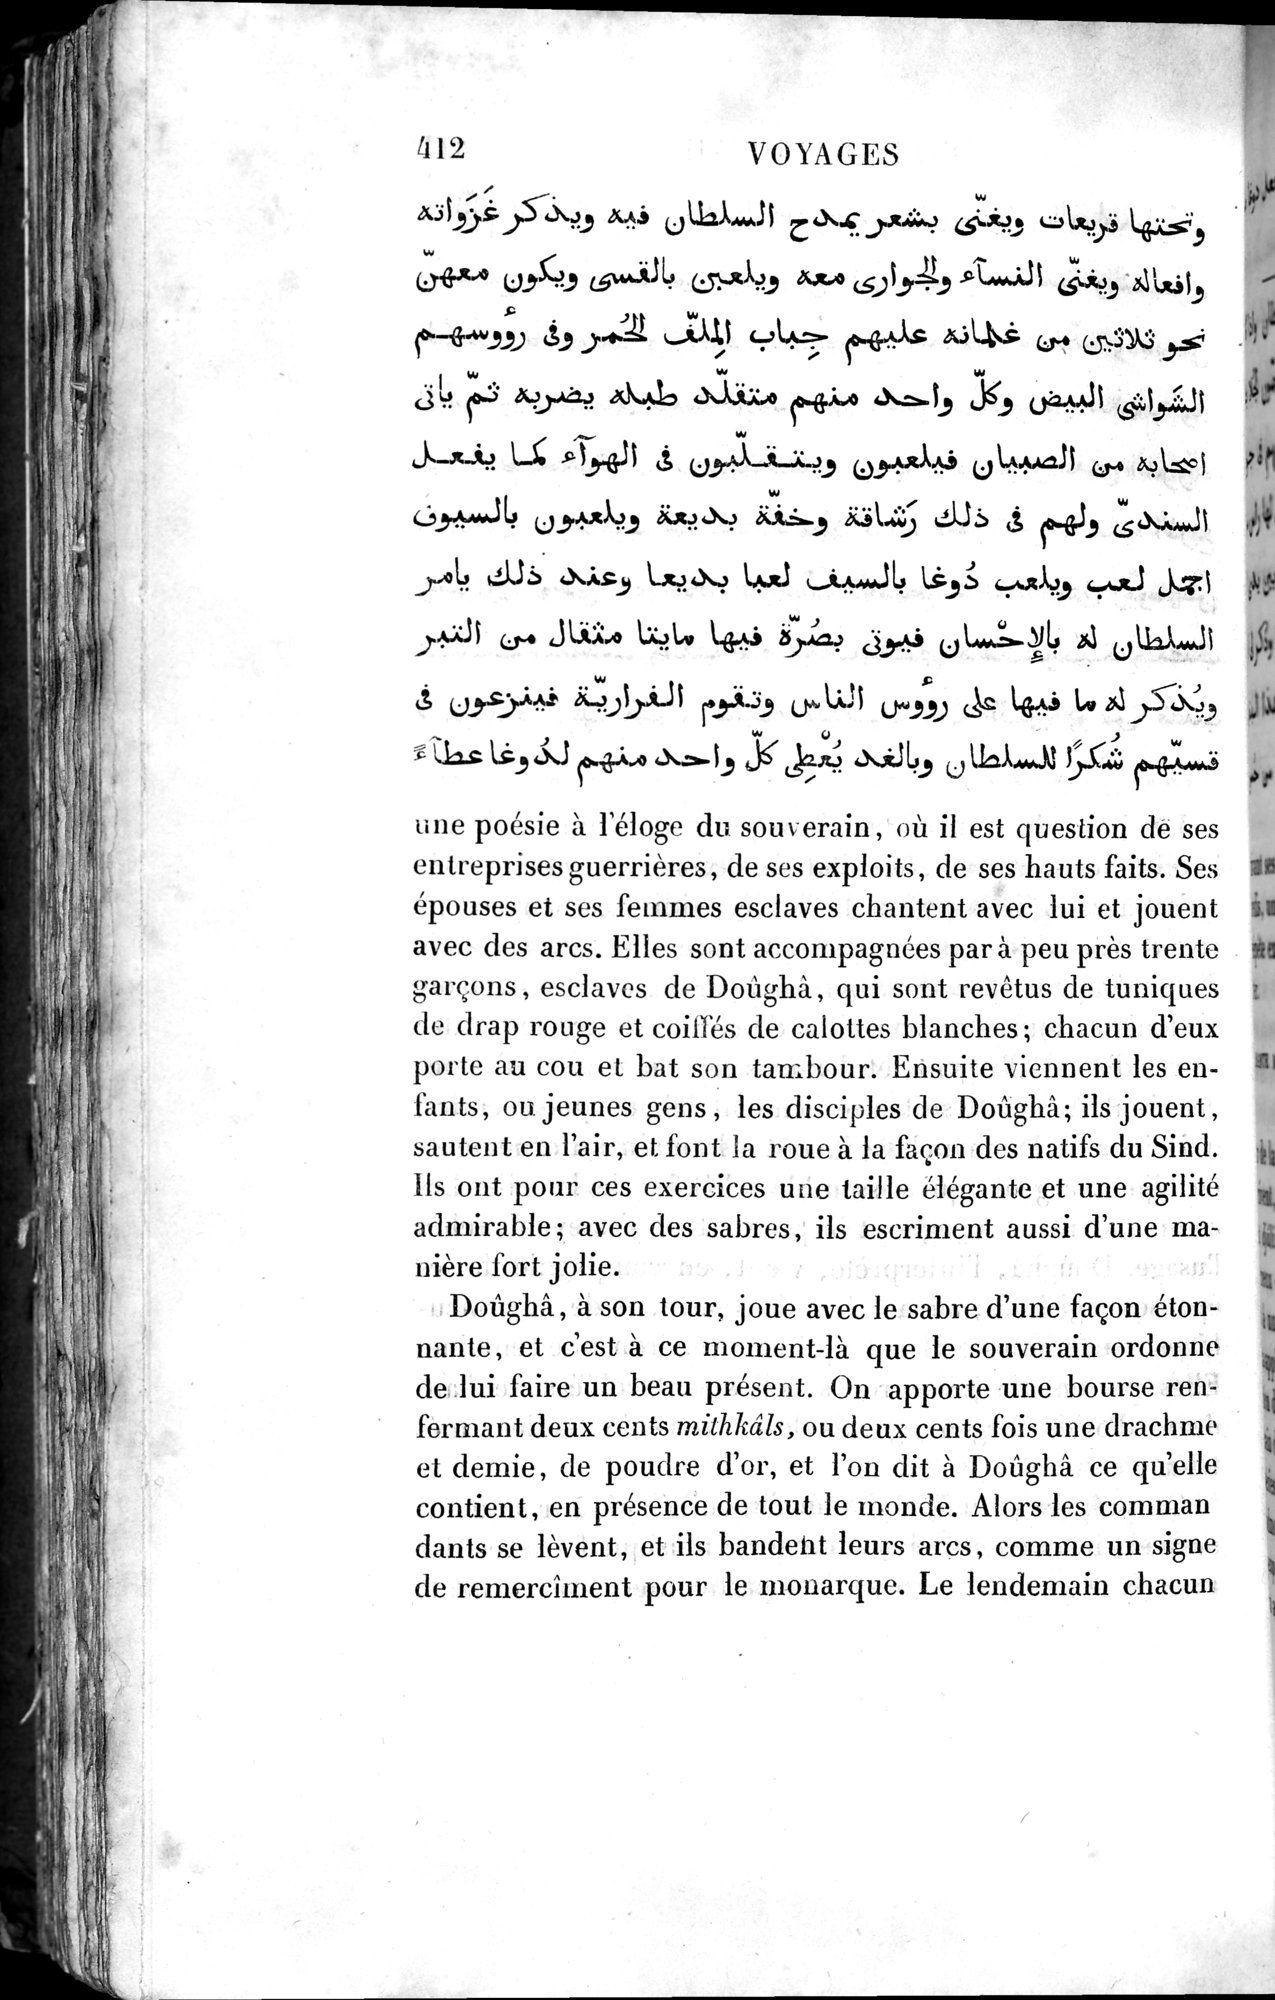 Voyages d'Ibn Batoutah : vol.4 / Page 424 (Grayscale High Resolution Image)